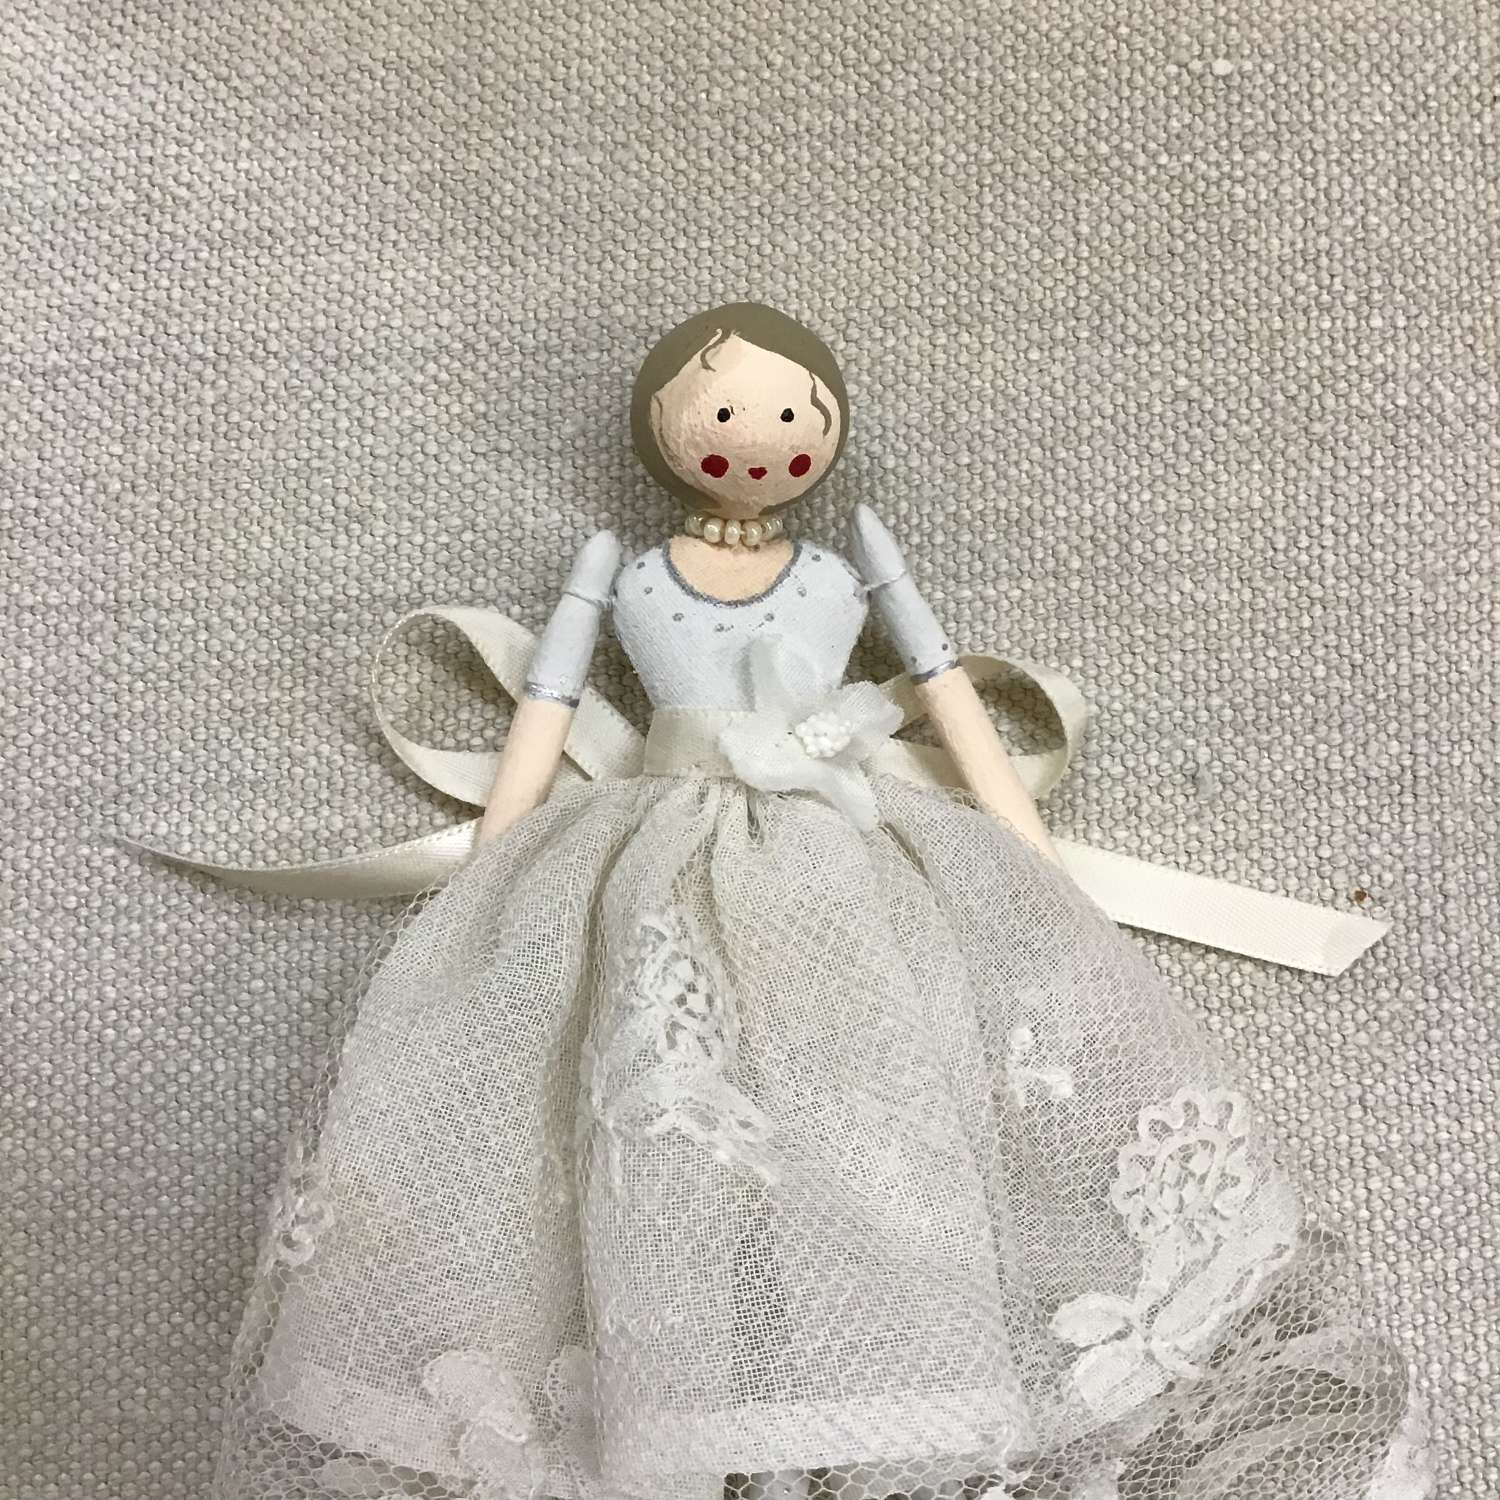 Hand crafted paper clay doll dressed in vintage fabrics and trims